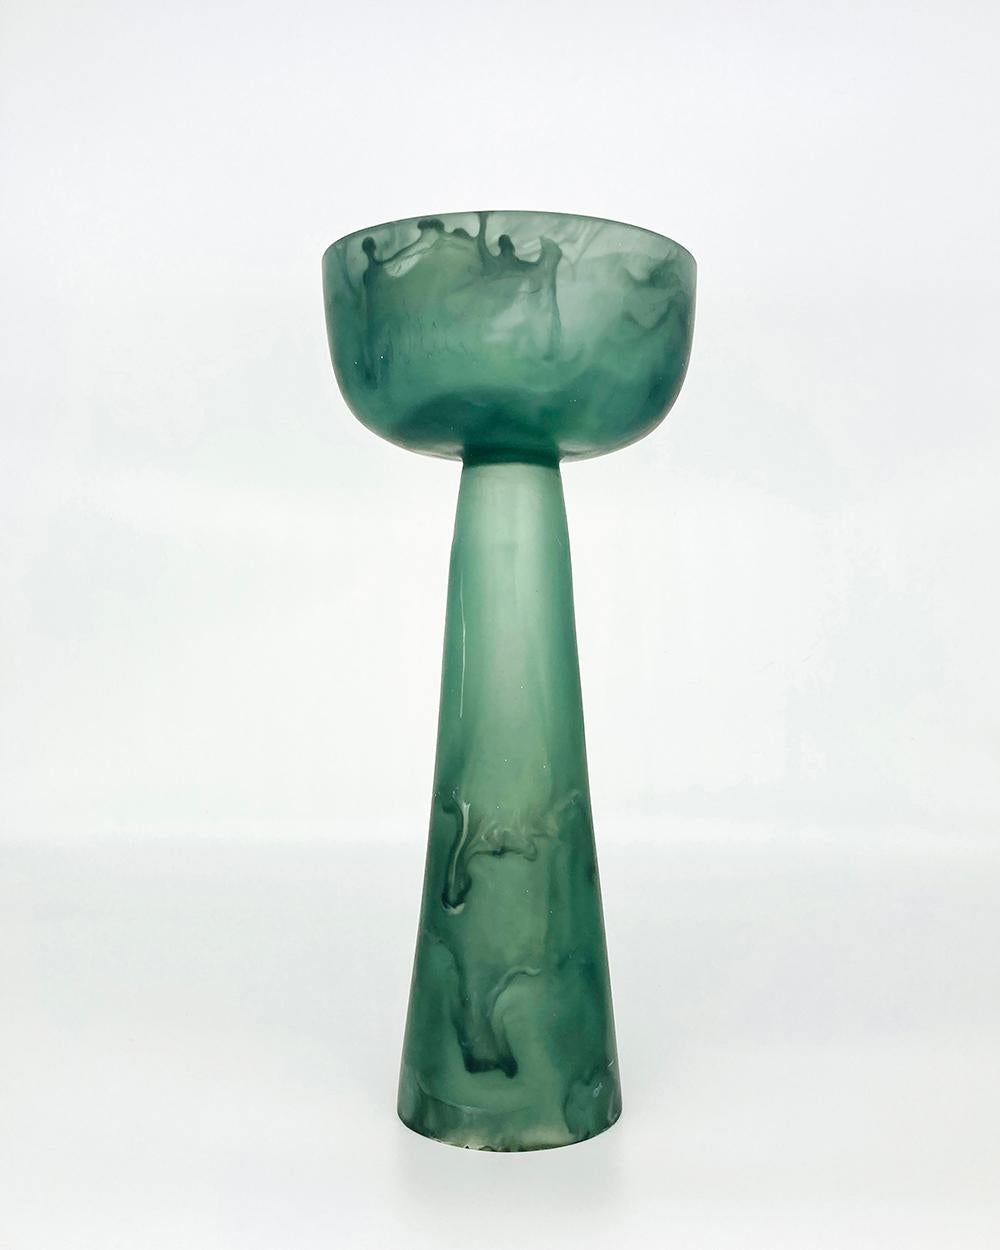 This emerald high resin pedestal bowl is a beautiful example of the artisanal craftsmanship that goes into each piece designed by Monica Calderon and handmade by expert artisans in Mexico. The high resin pedestal bowl in emerald is made from a